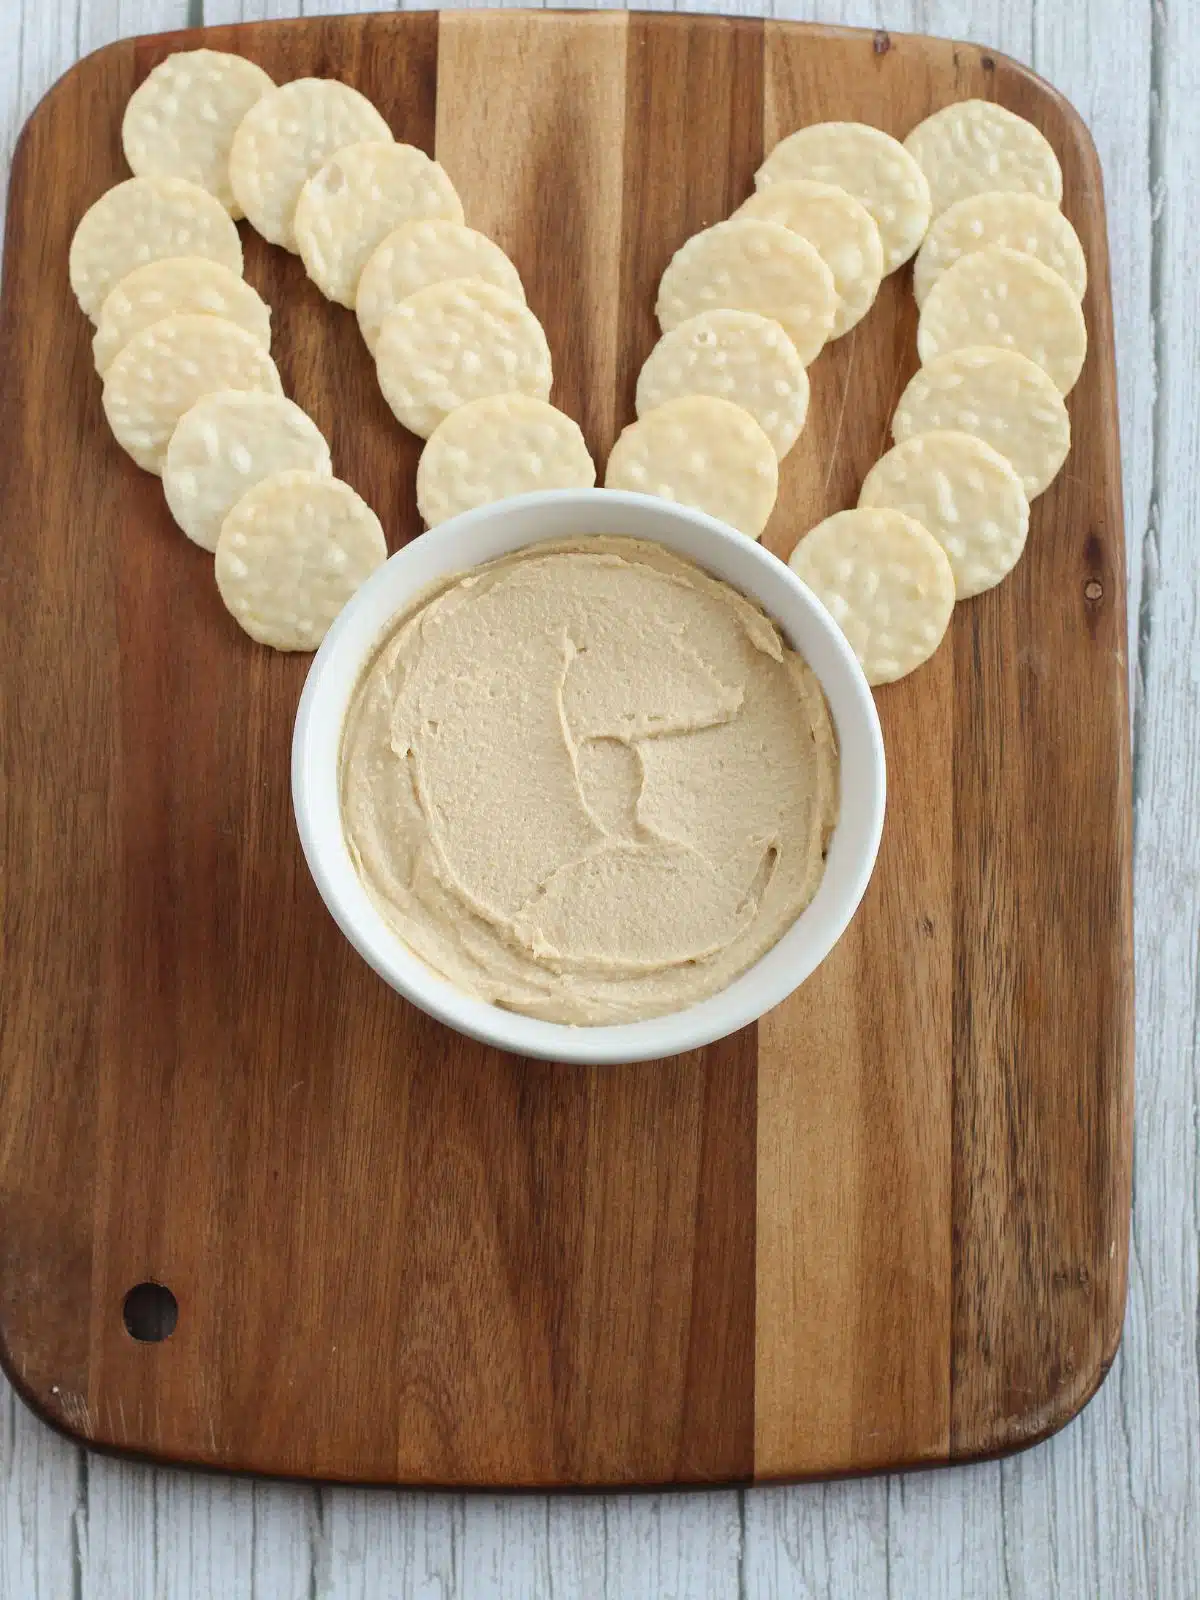 Cracker bunny ears and bowl of hummus on a wooden board